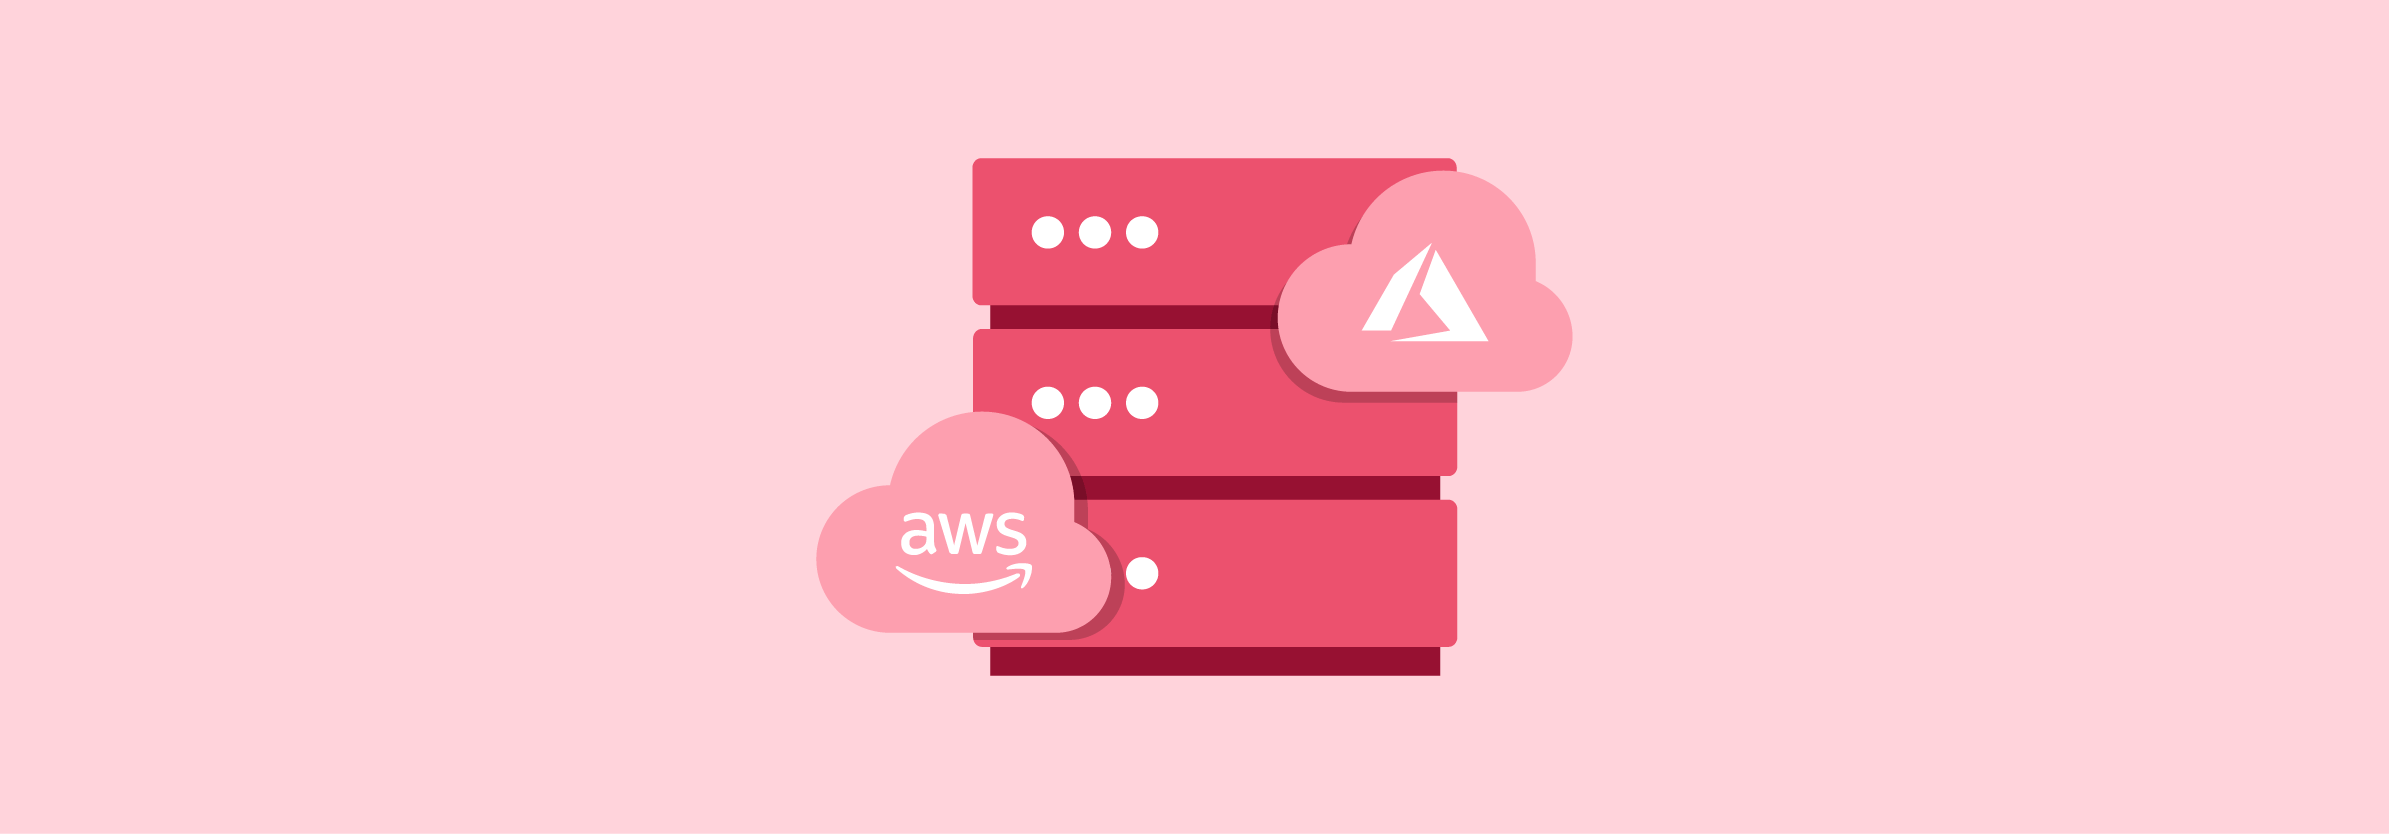 Architecture of Adobe Commerce Cloud featuring AWS and Azure support